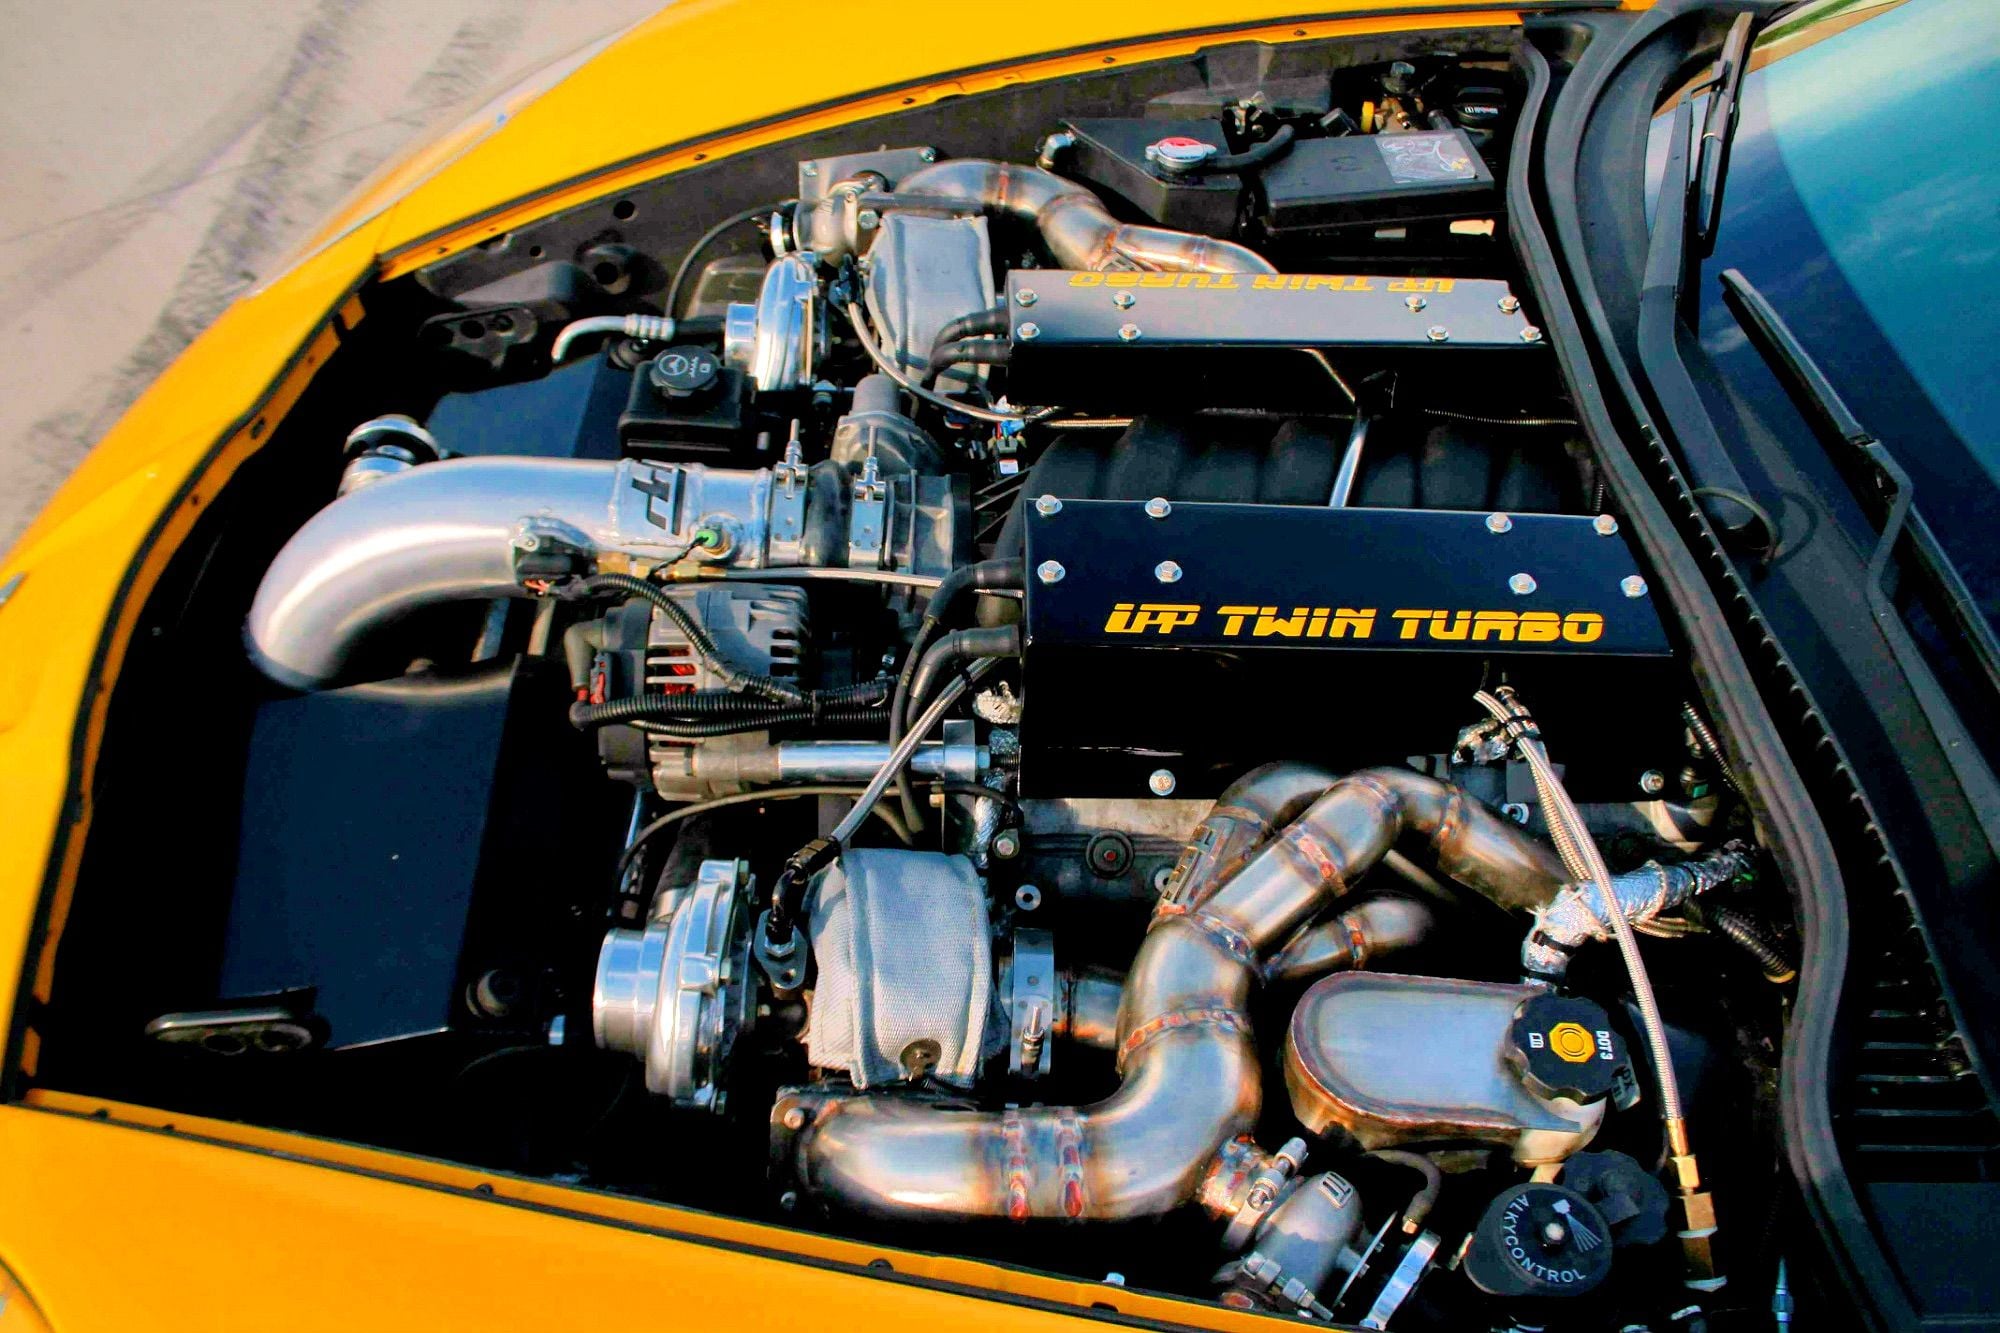 700 Supercharged HP just isn't enough!!...Time to go Twin Turbo! 